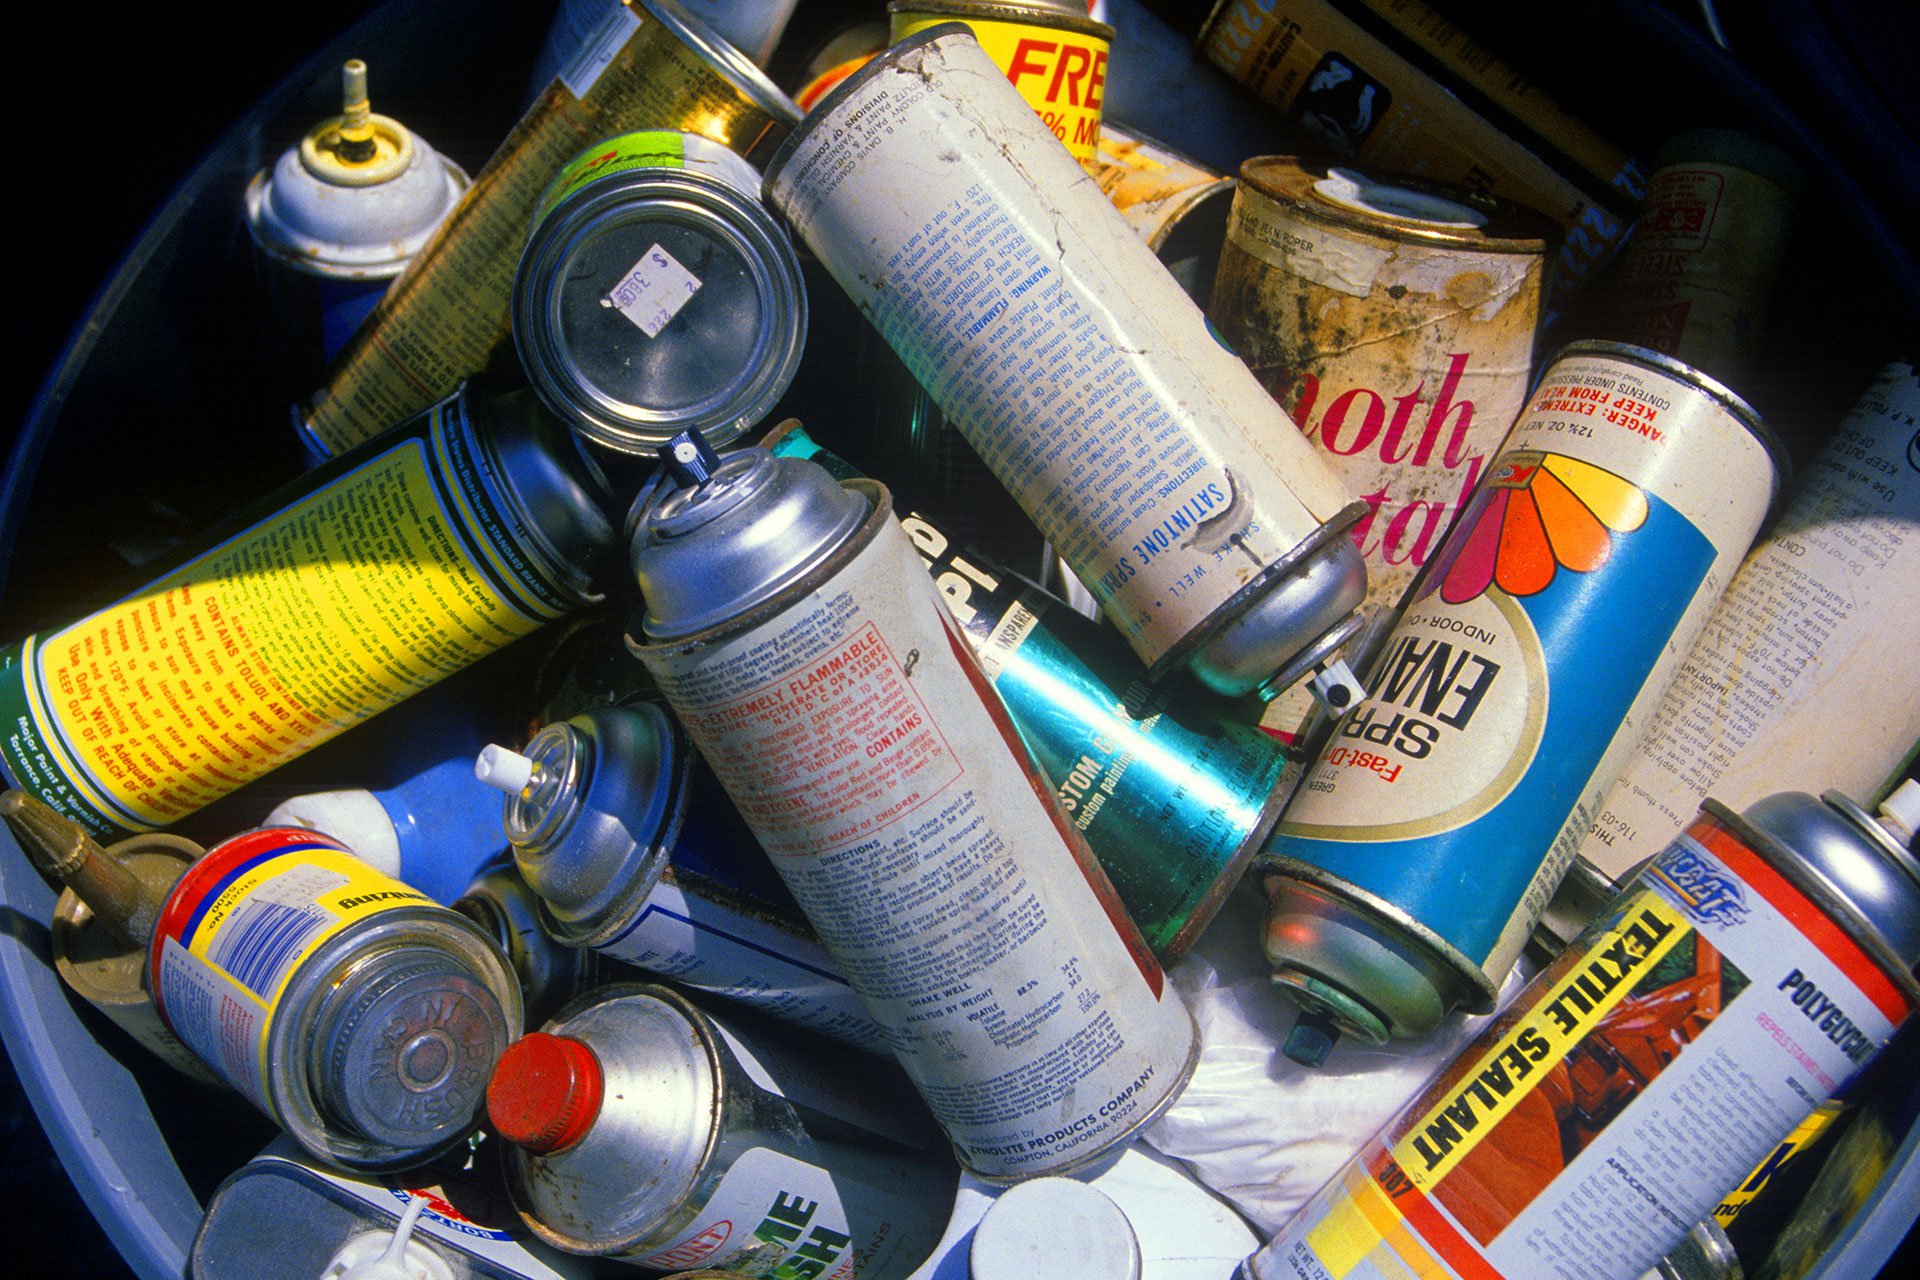 A pile of discarded aerosol cans.